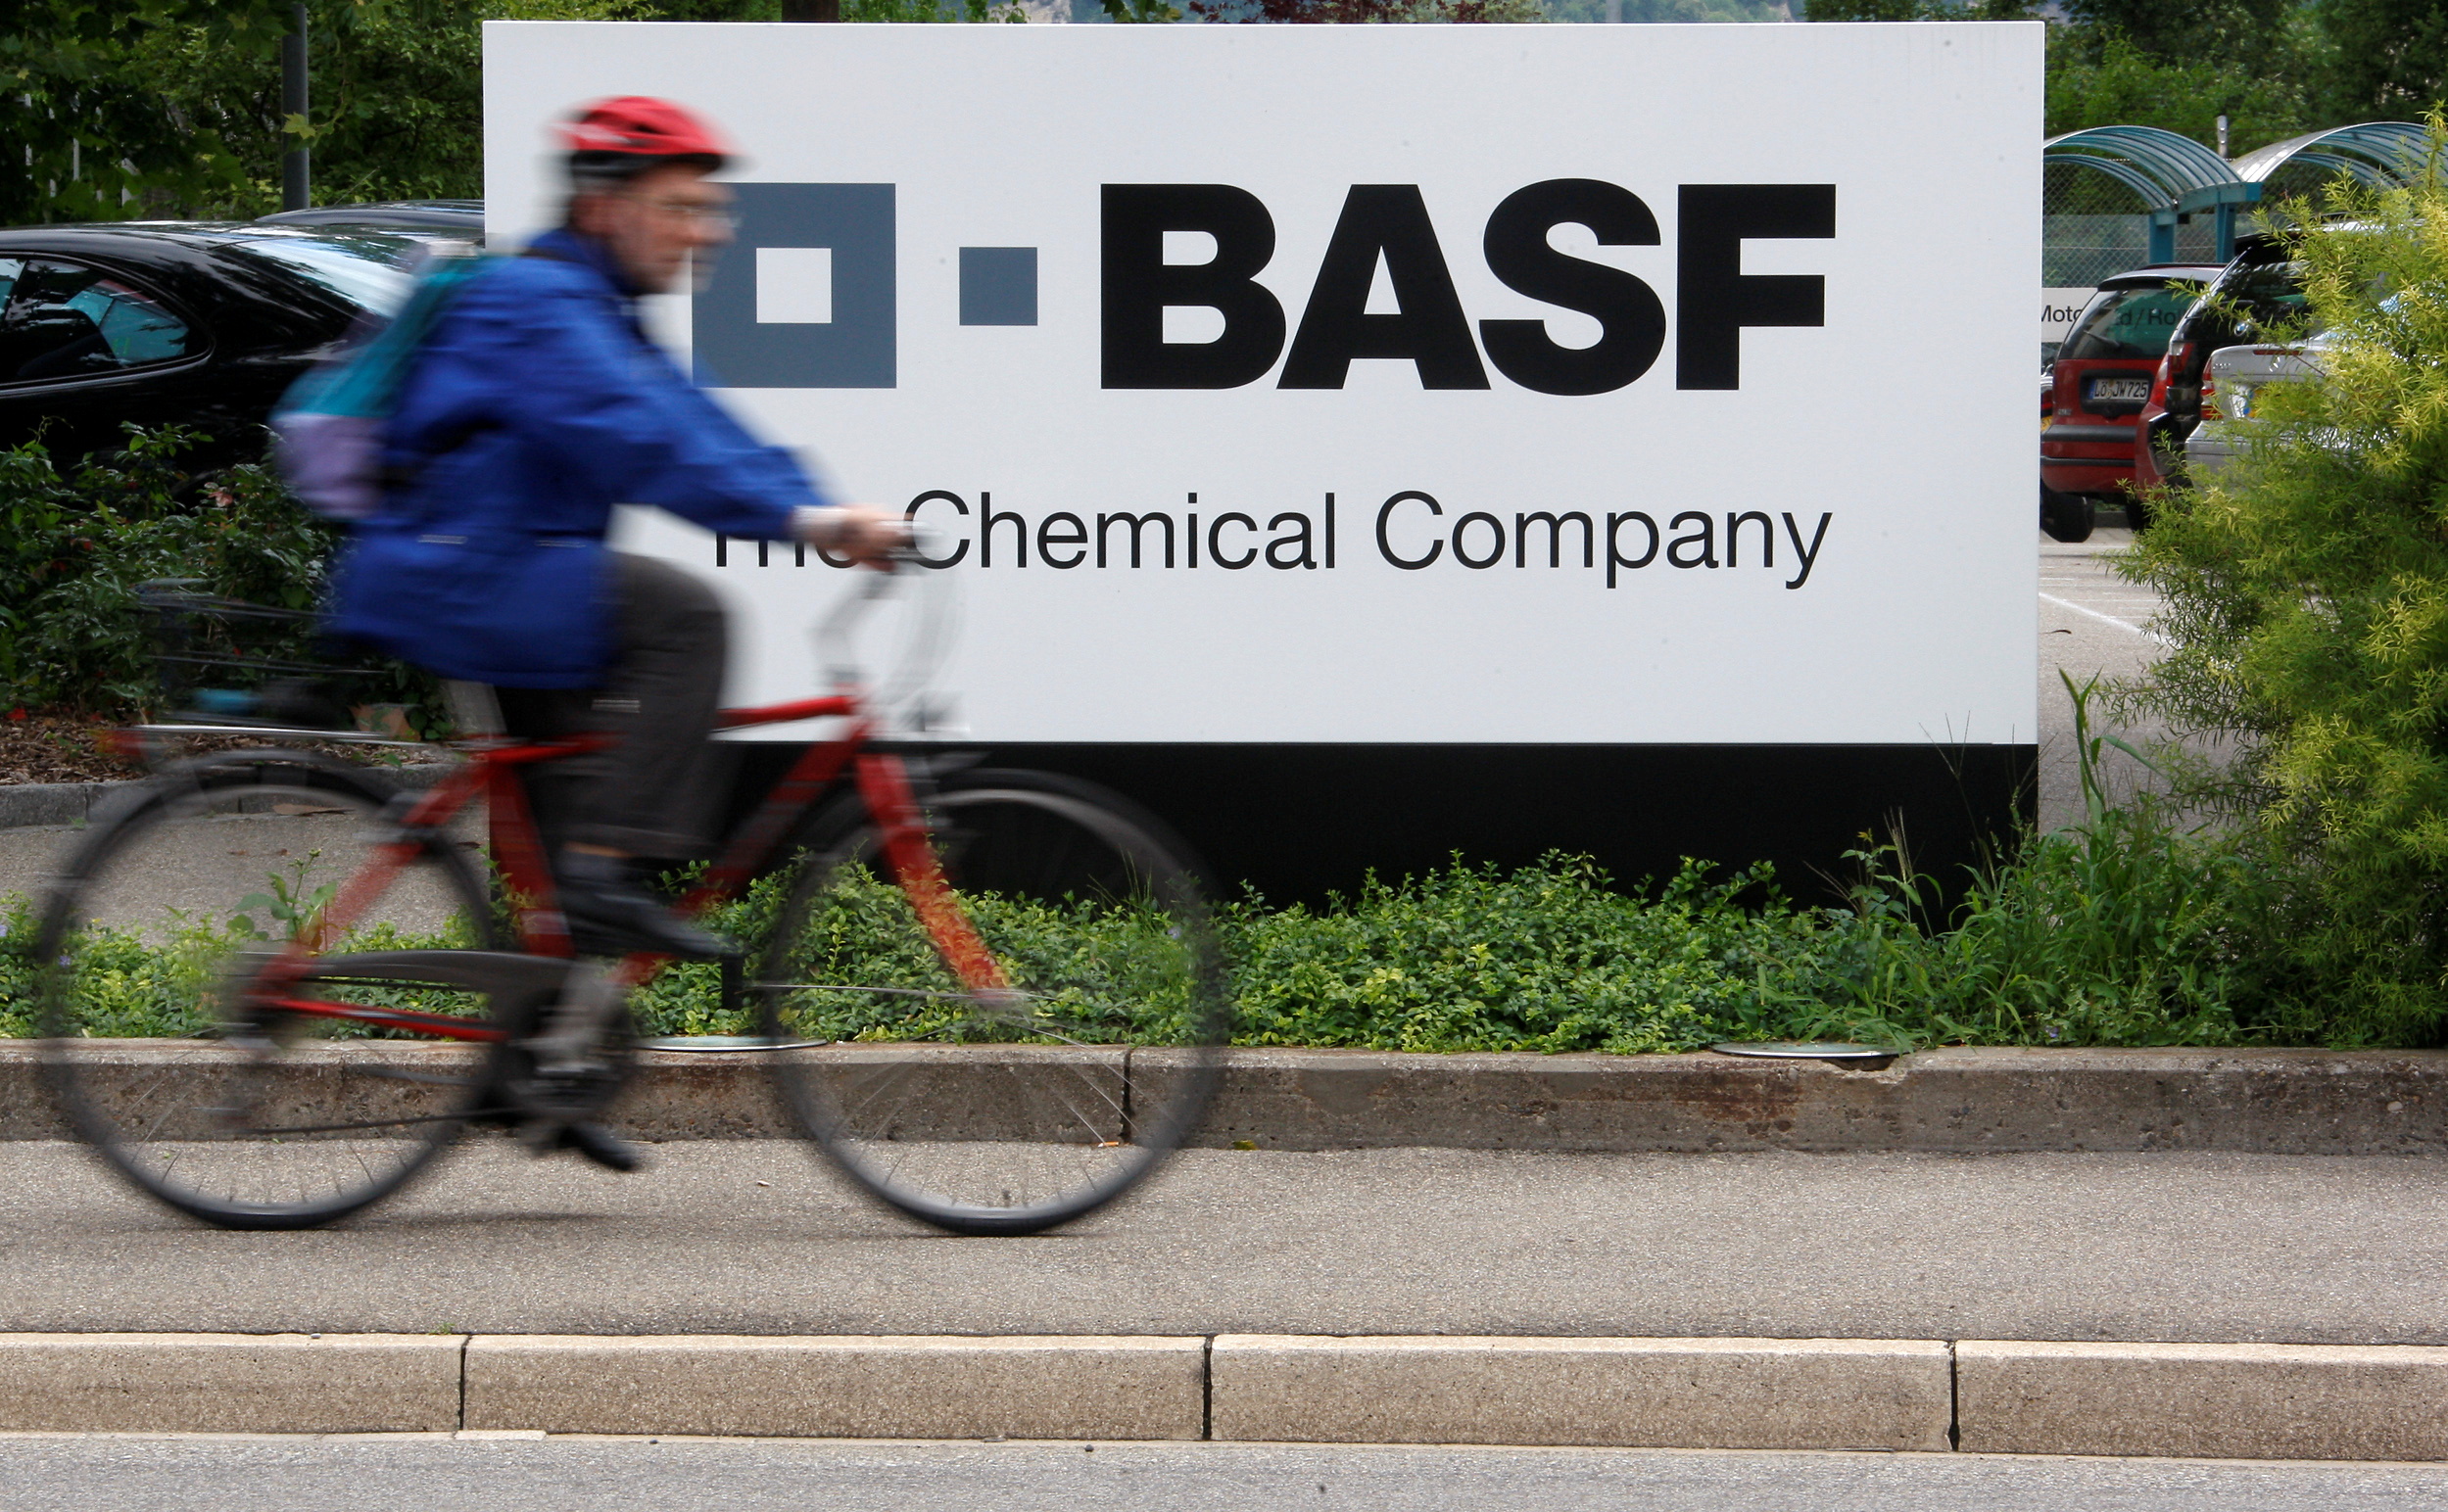 A cyclist rides past the entrance of a BASF plant in Schweizerhalle, Switzerland